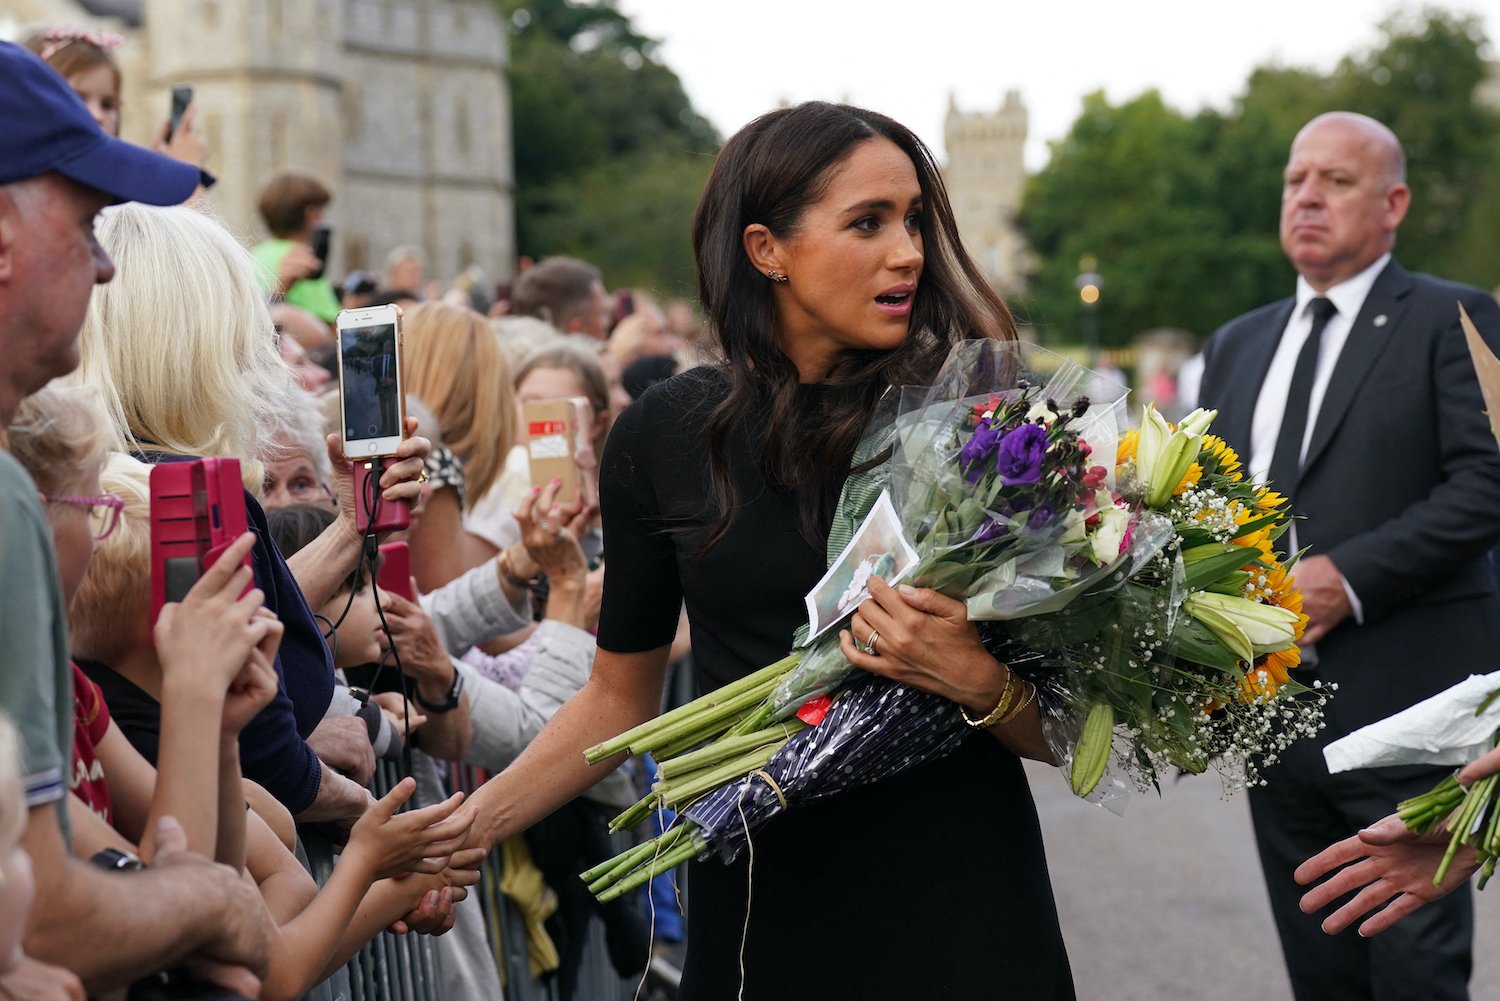 Meghan Markle’s ‘Rude’ Moment During Windsor Castle Walkabout Explained: It ‘Was a Difficult Appearance,’ Body Language Expert Says